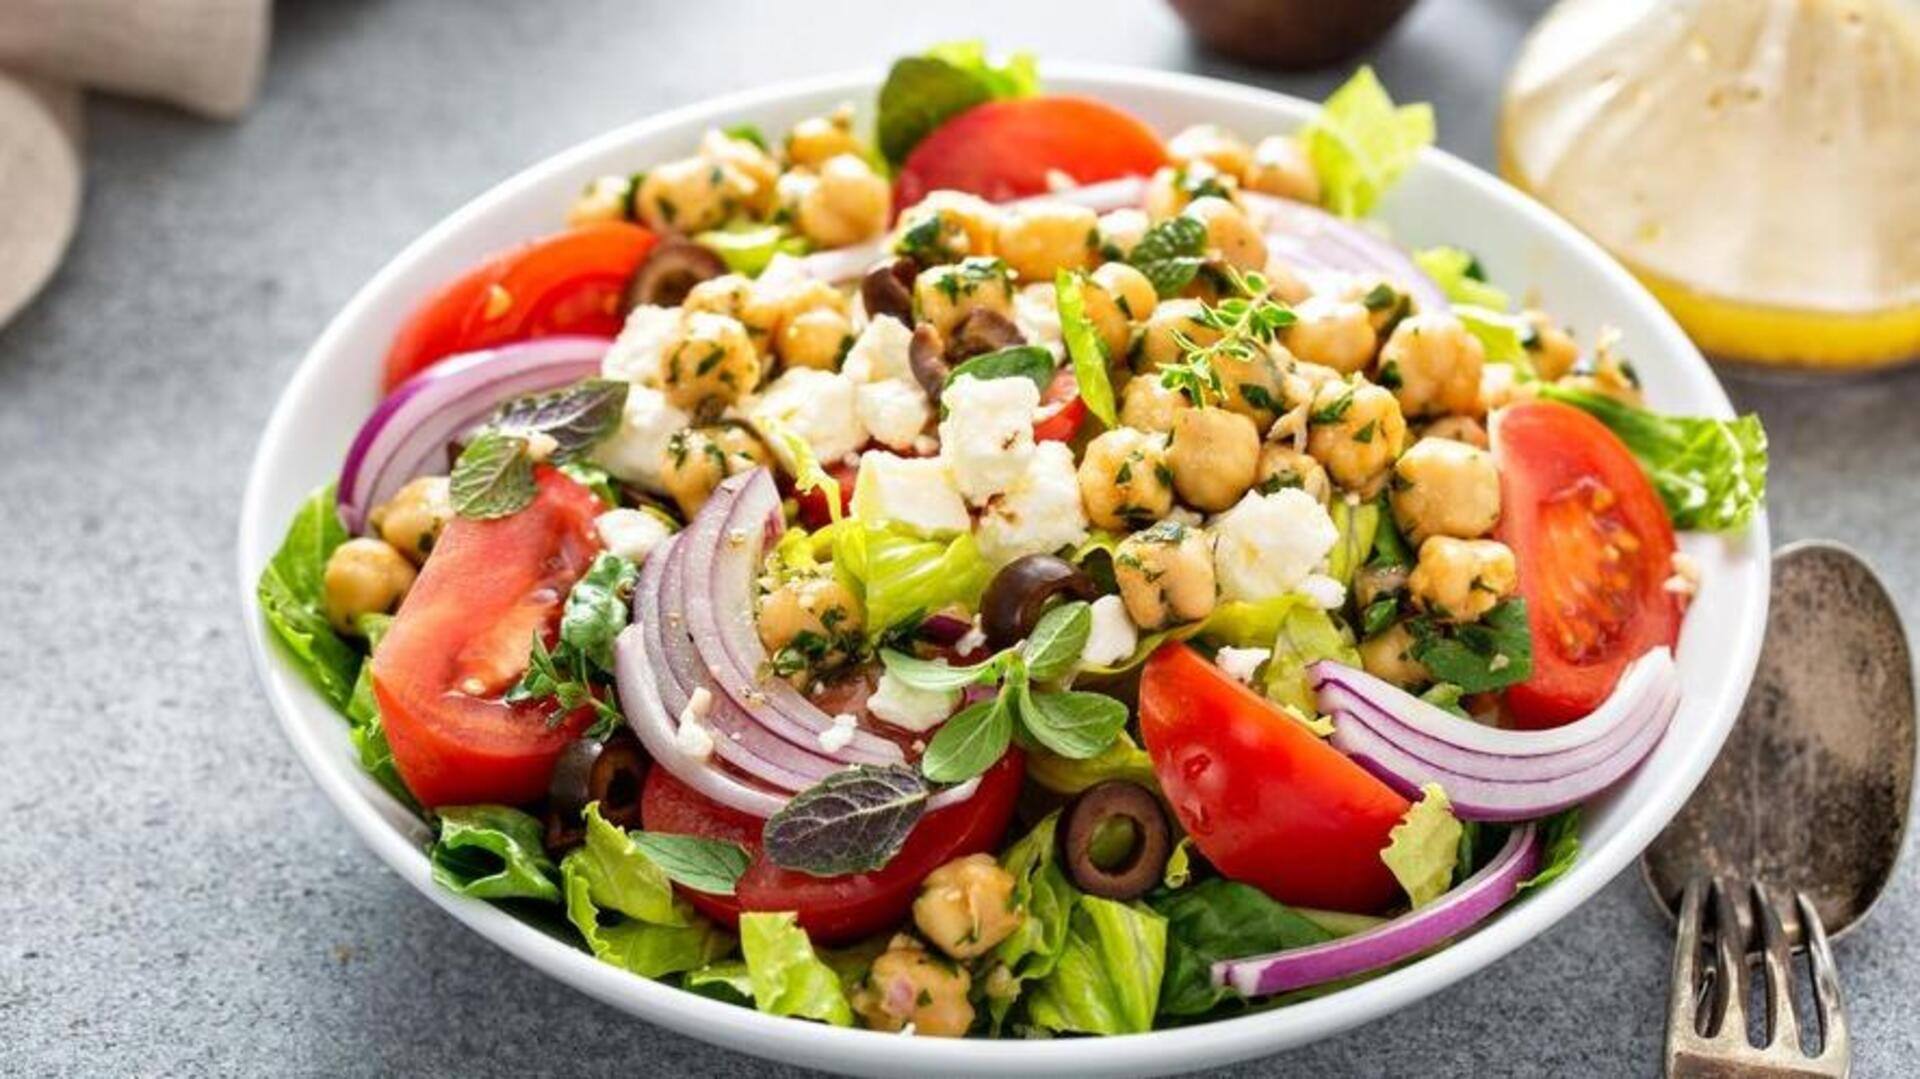 Try this Mediterranean chickpea salad recipe for a healthy day